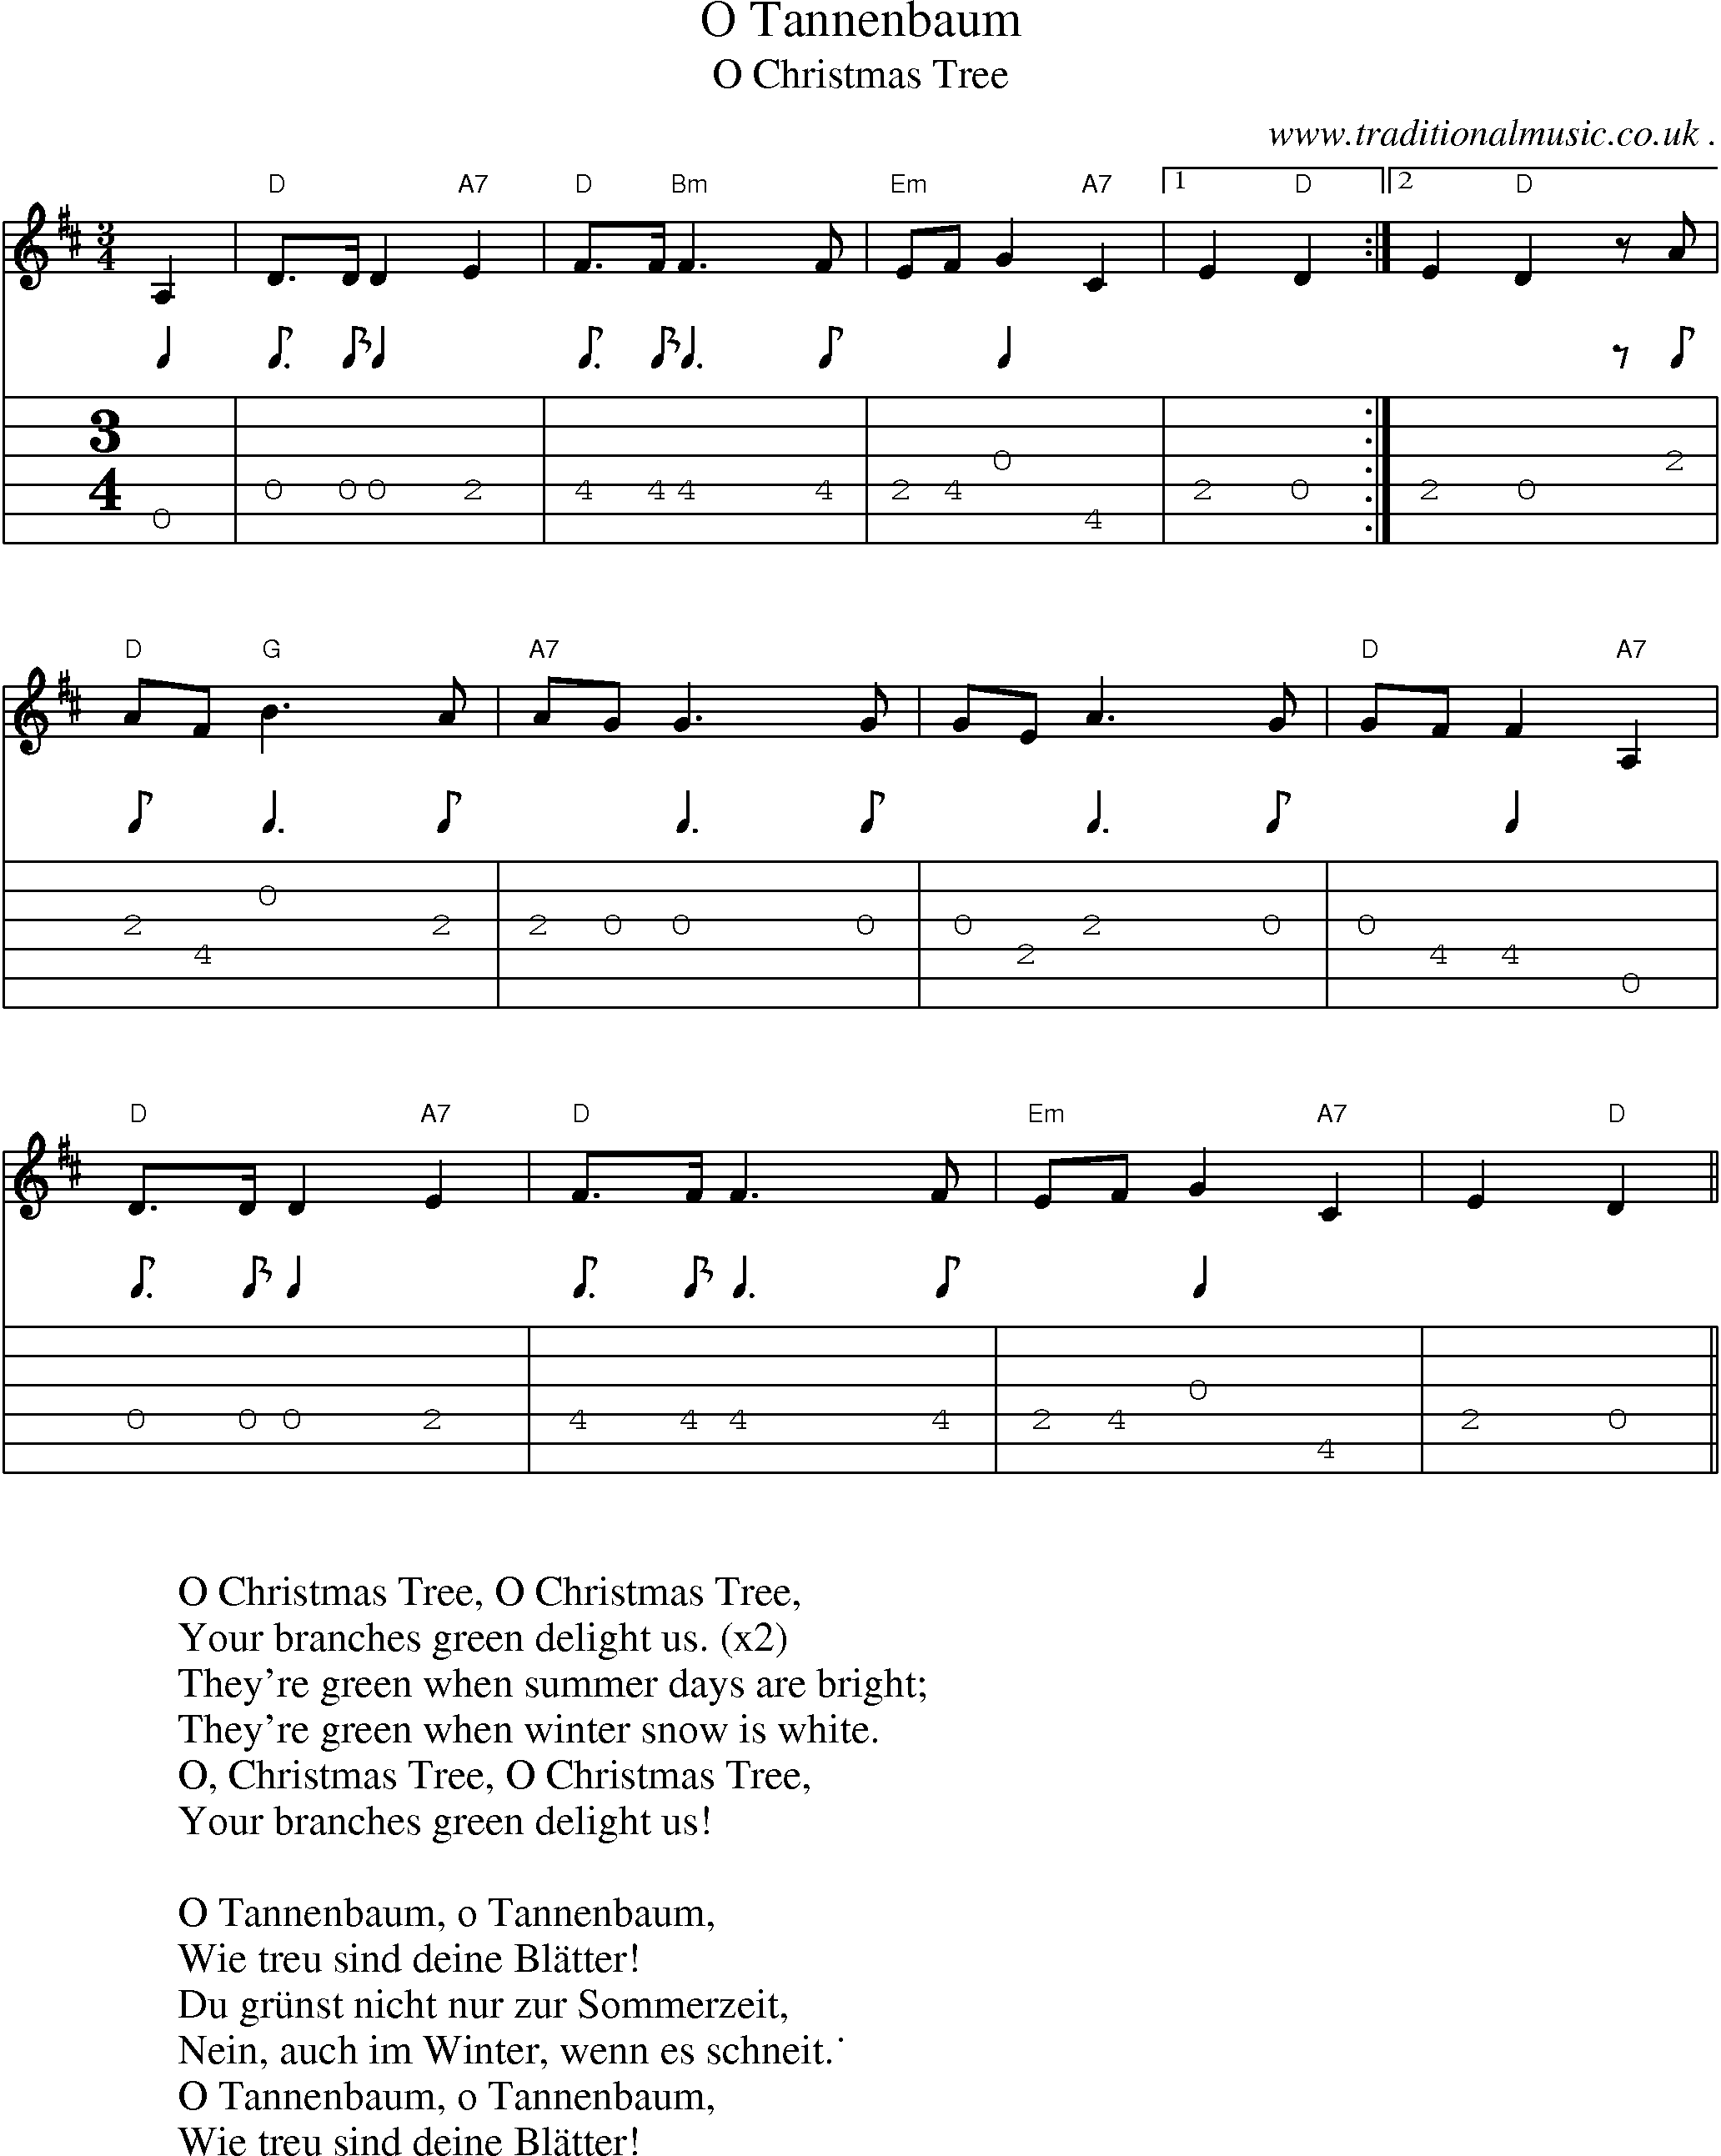 Music Score and Guitar Tabs for O Tannenbaum